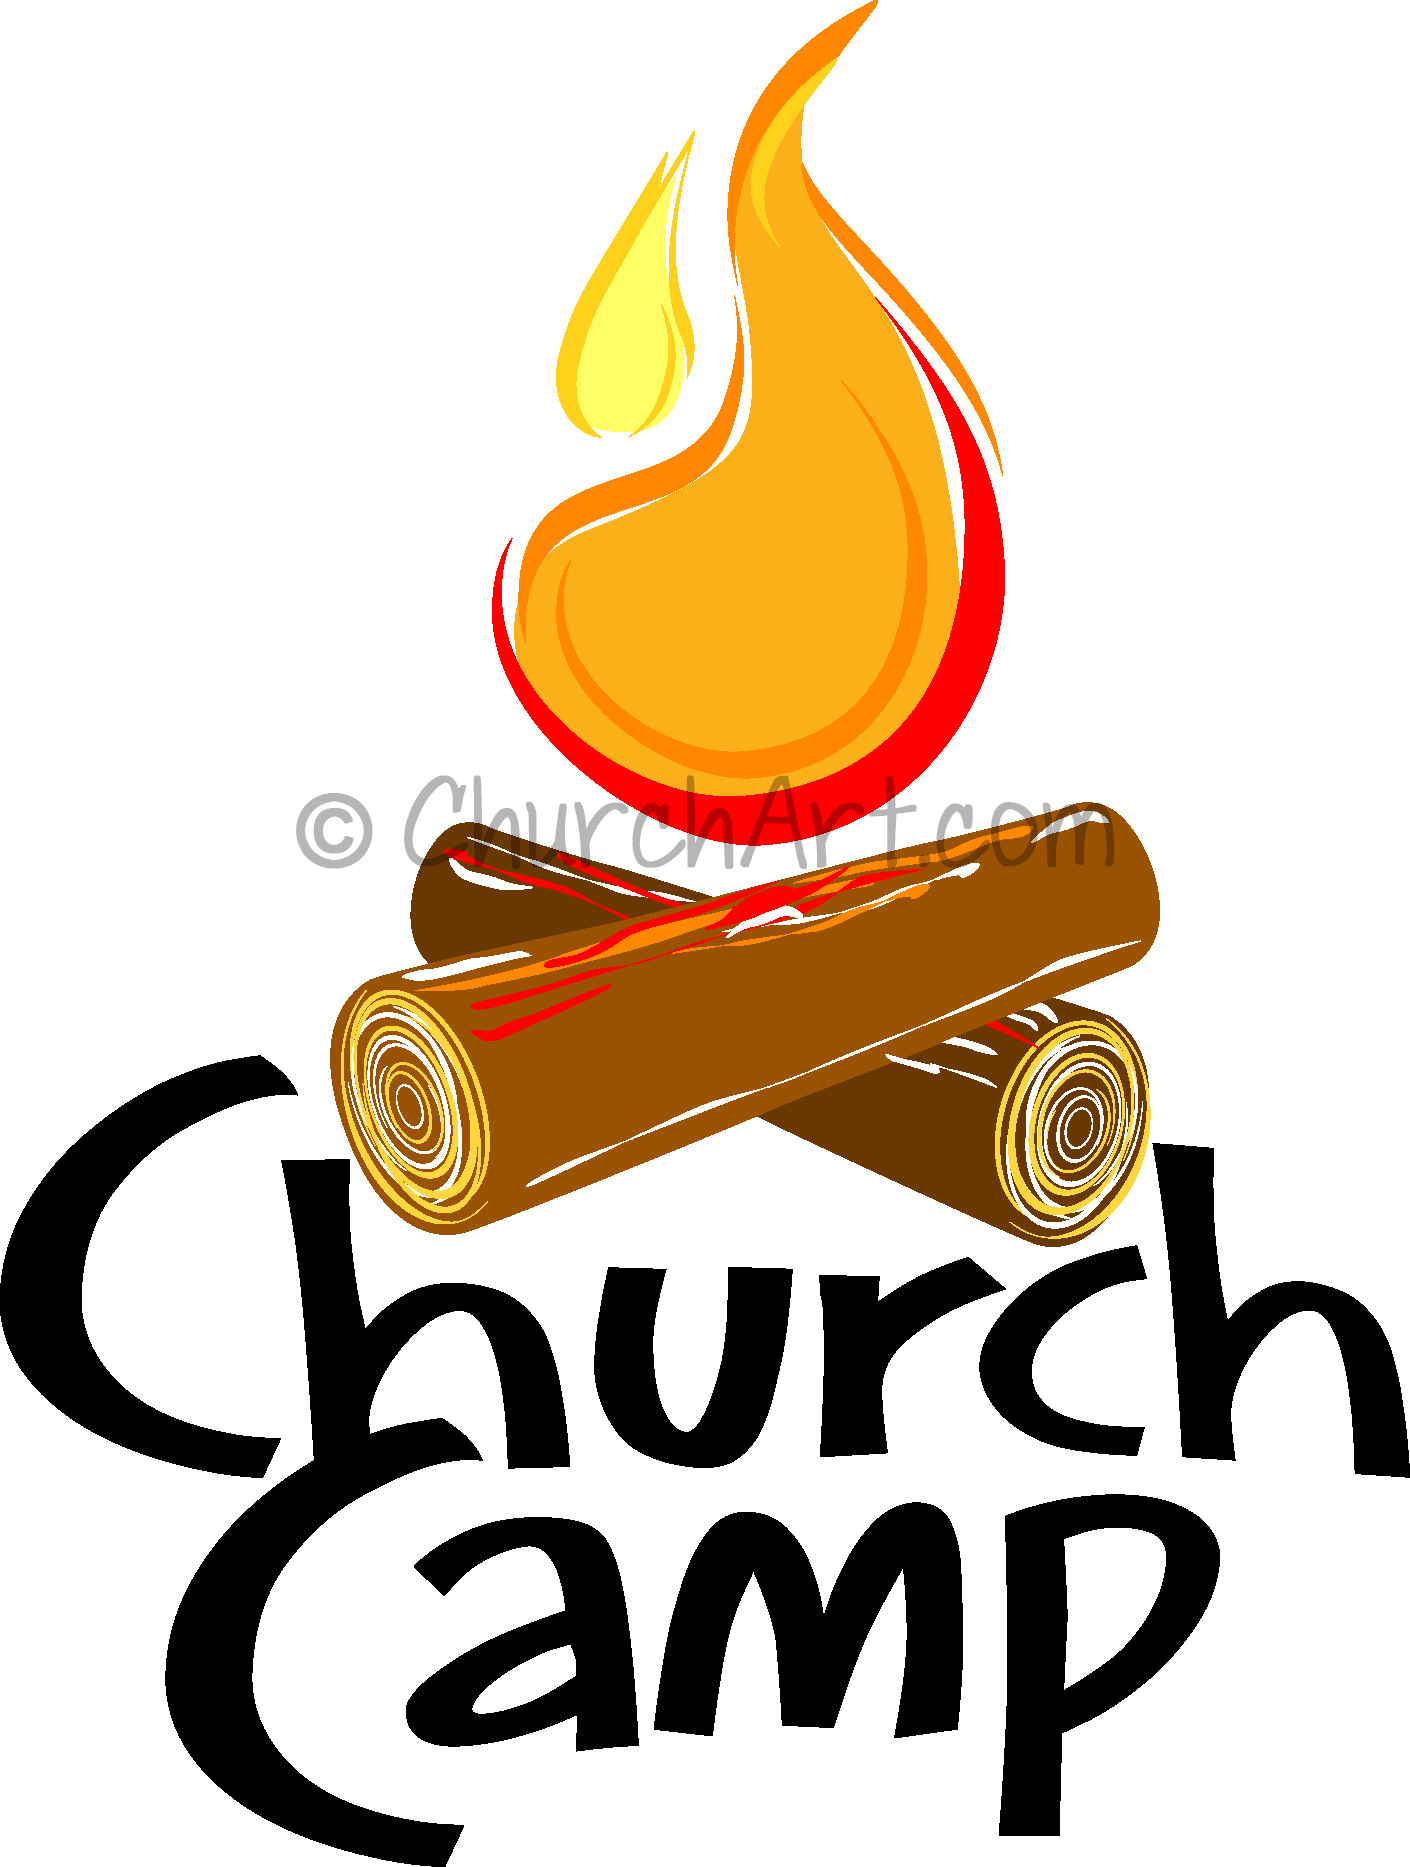 christian youth camp clip art